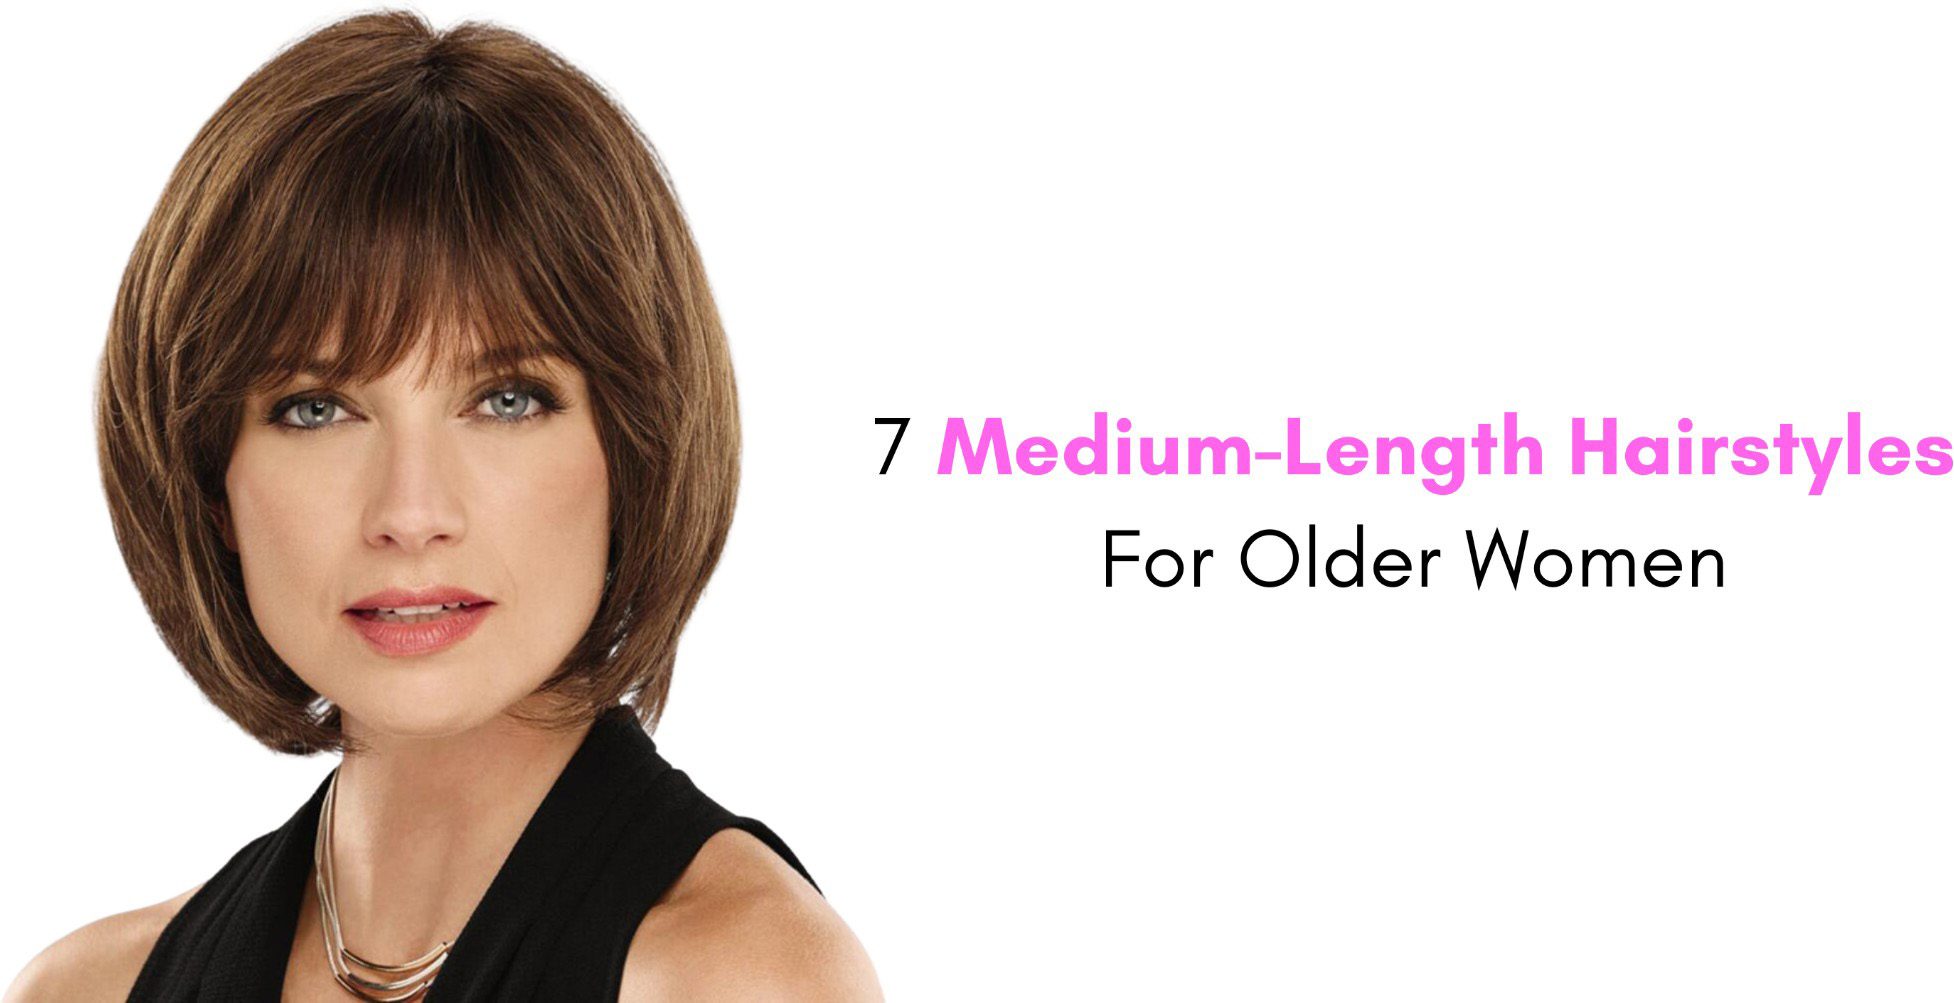 7. Short Shoulder Length Hairstyles for Curly Hair - wide 3